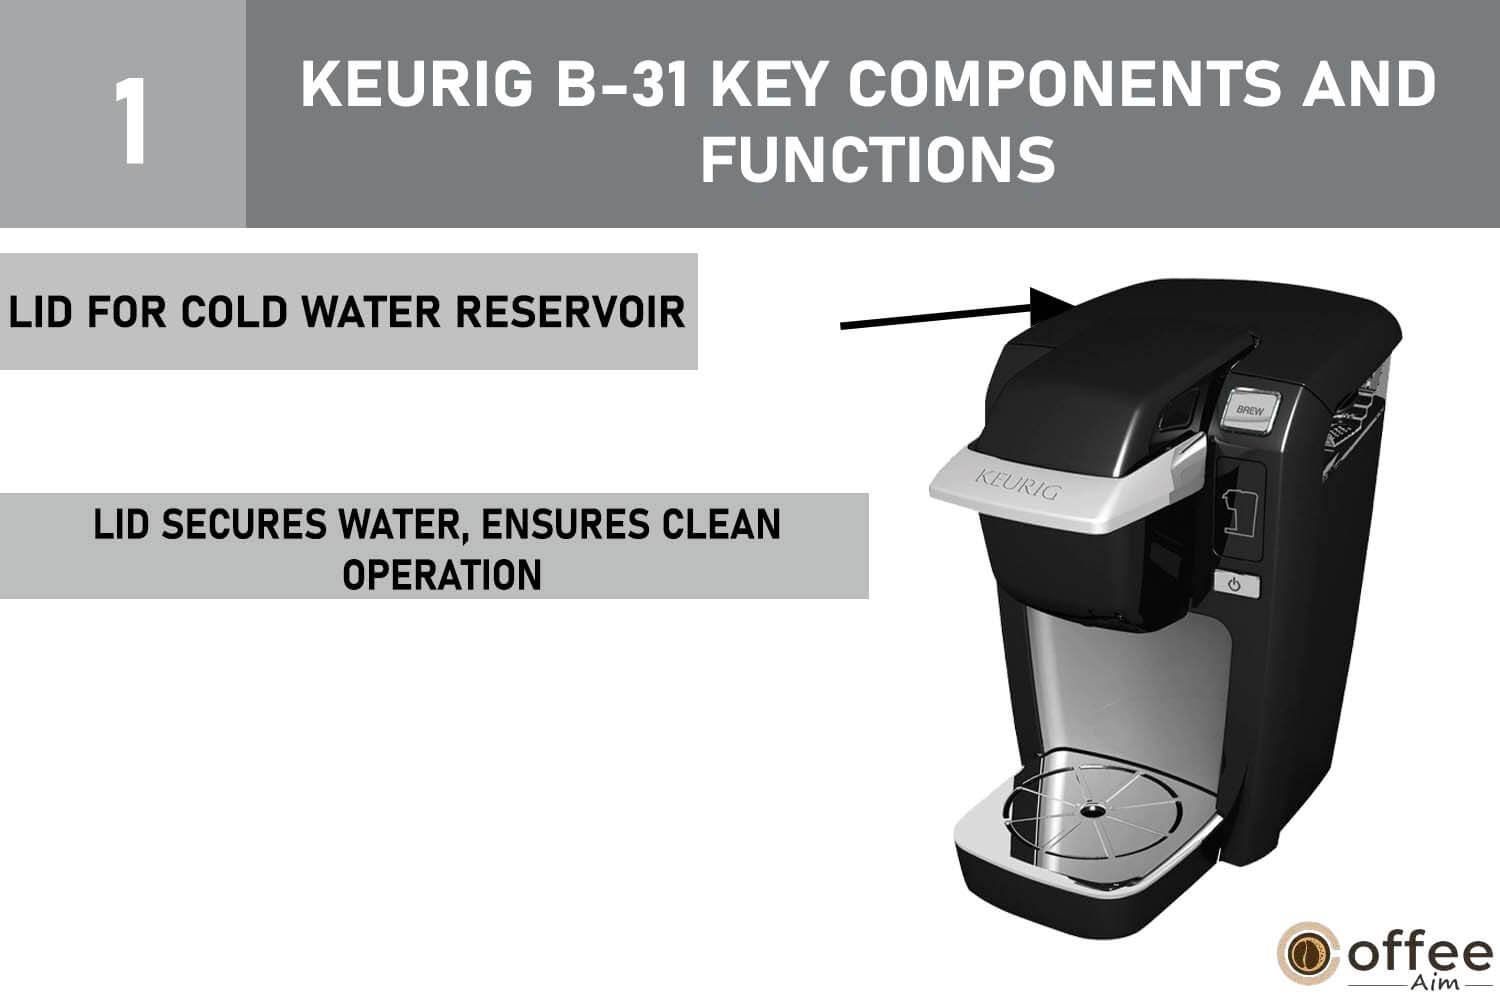 This image depicts the component labeled as the 'Lid for Cold Water Reservoir' on the Keurig B-31 coffee maker, as part of the instructional article on how to operate the Keurig B-31